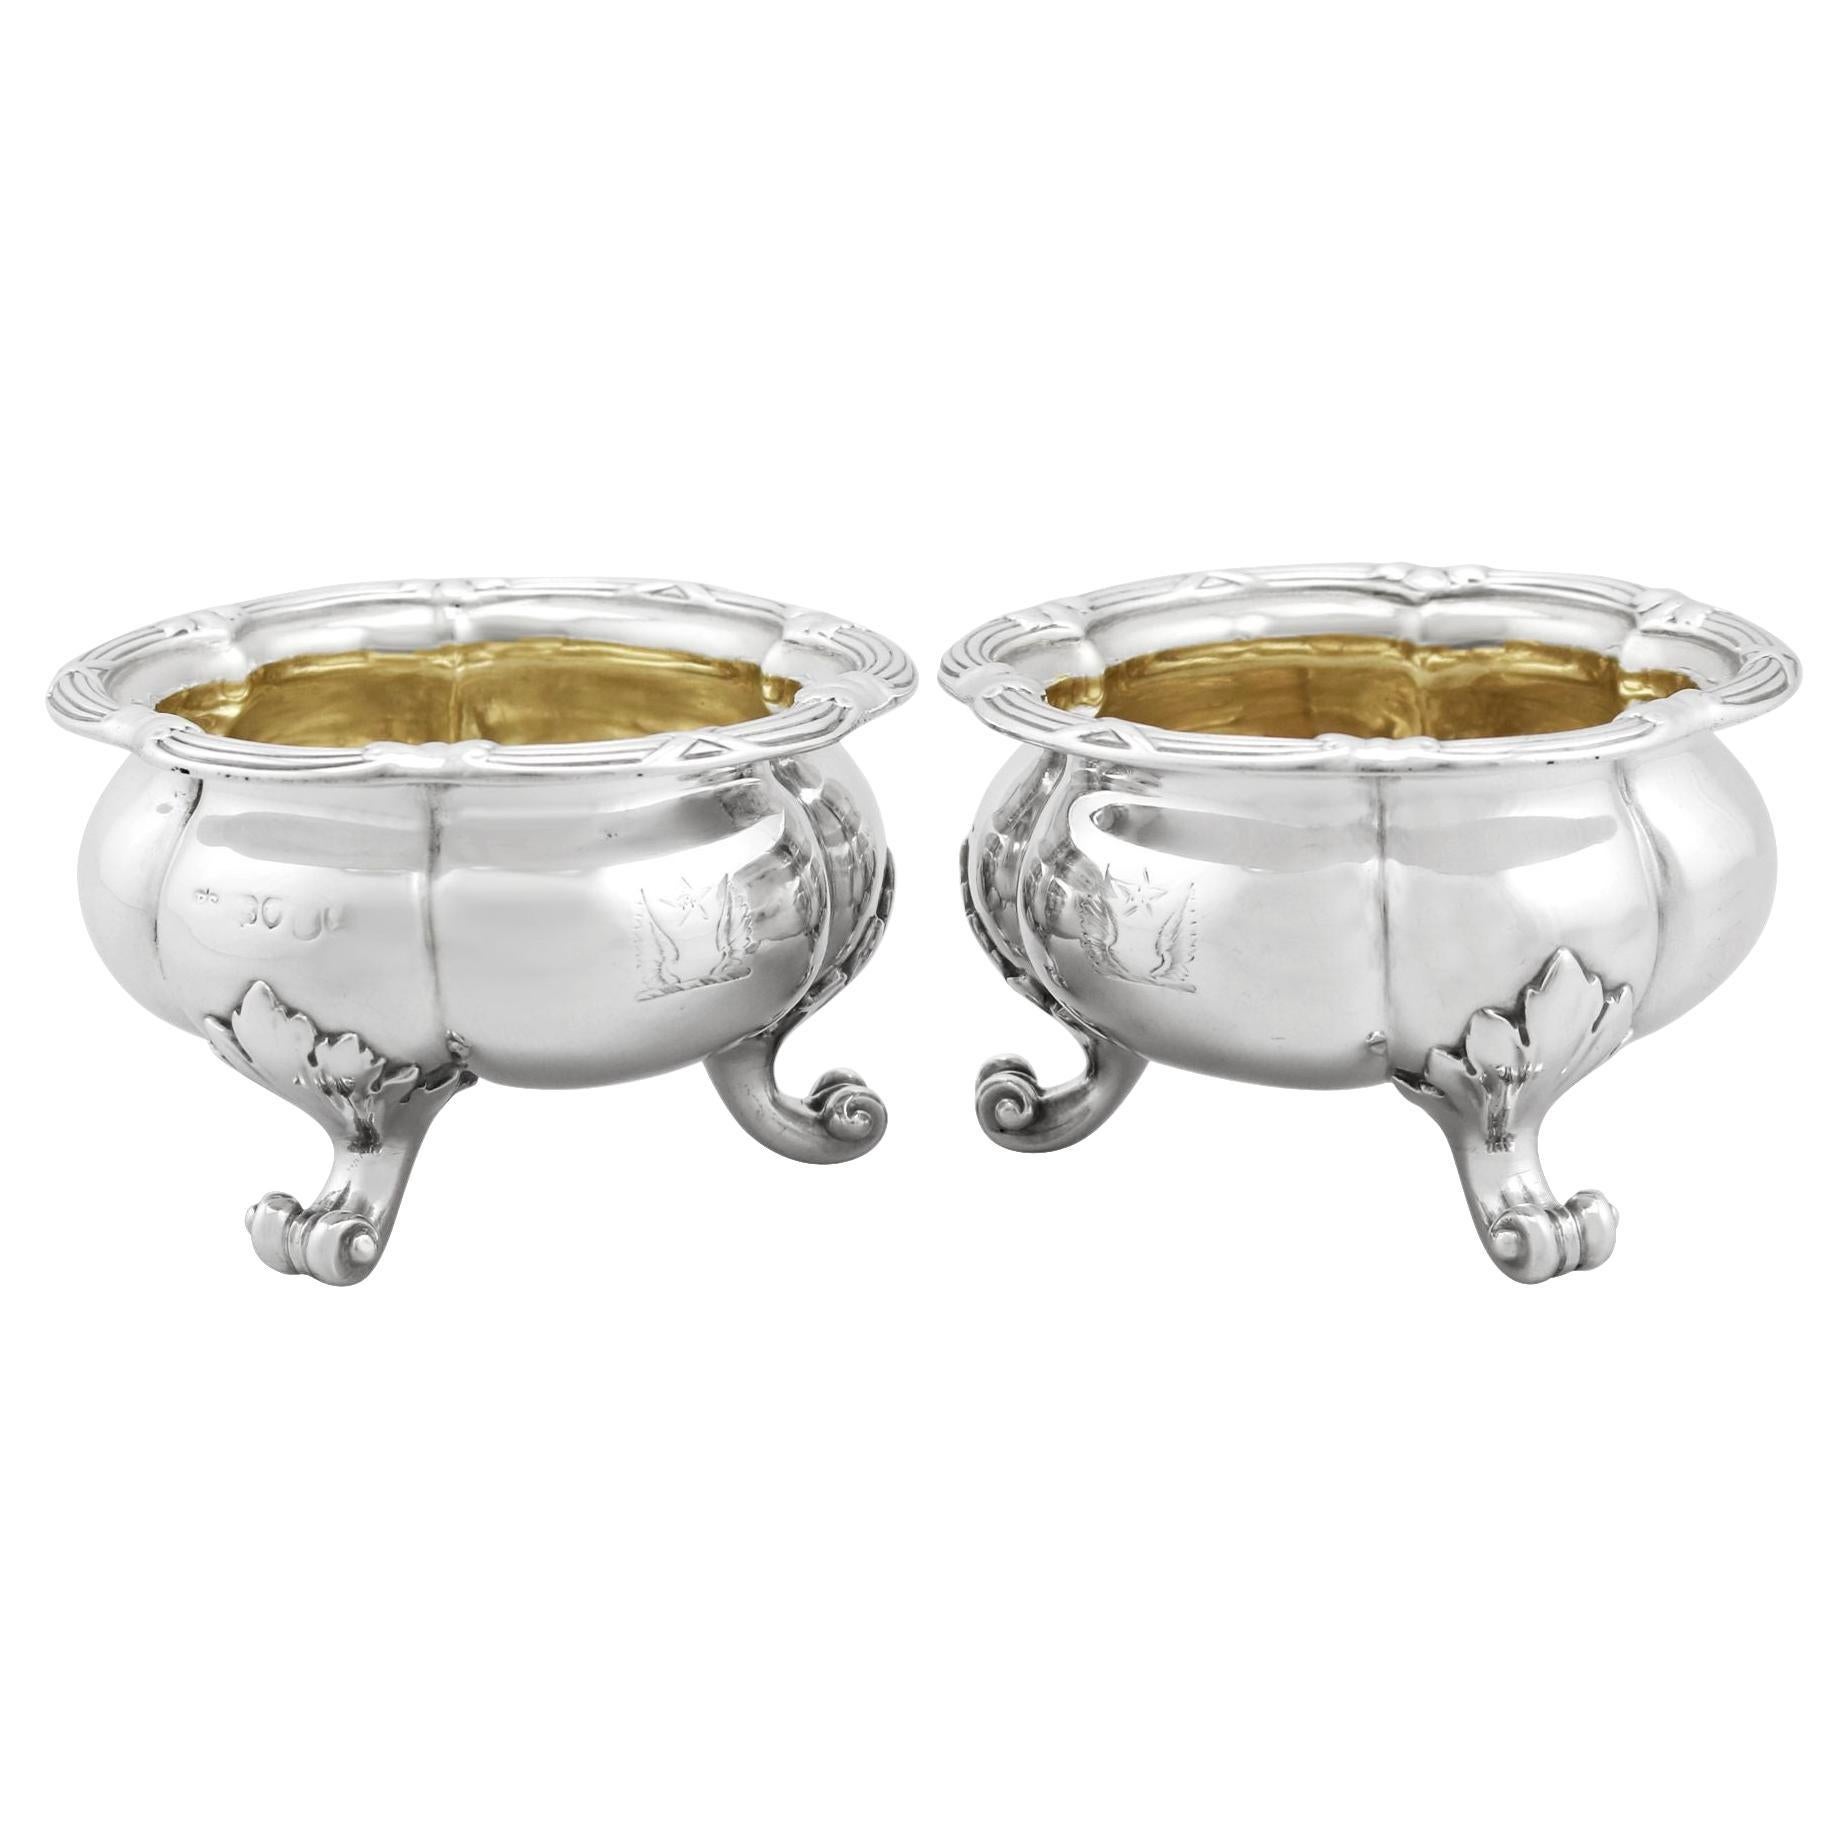 Paul Storr Antique Victorian Sterling Silver Salts, Circa 1840 For Sale